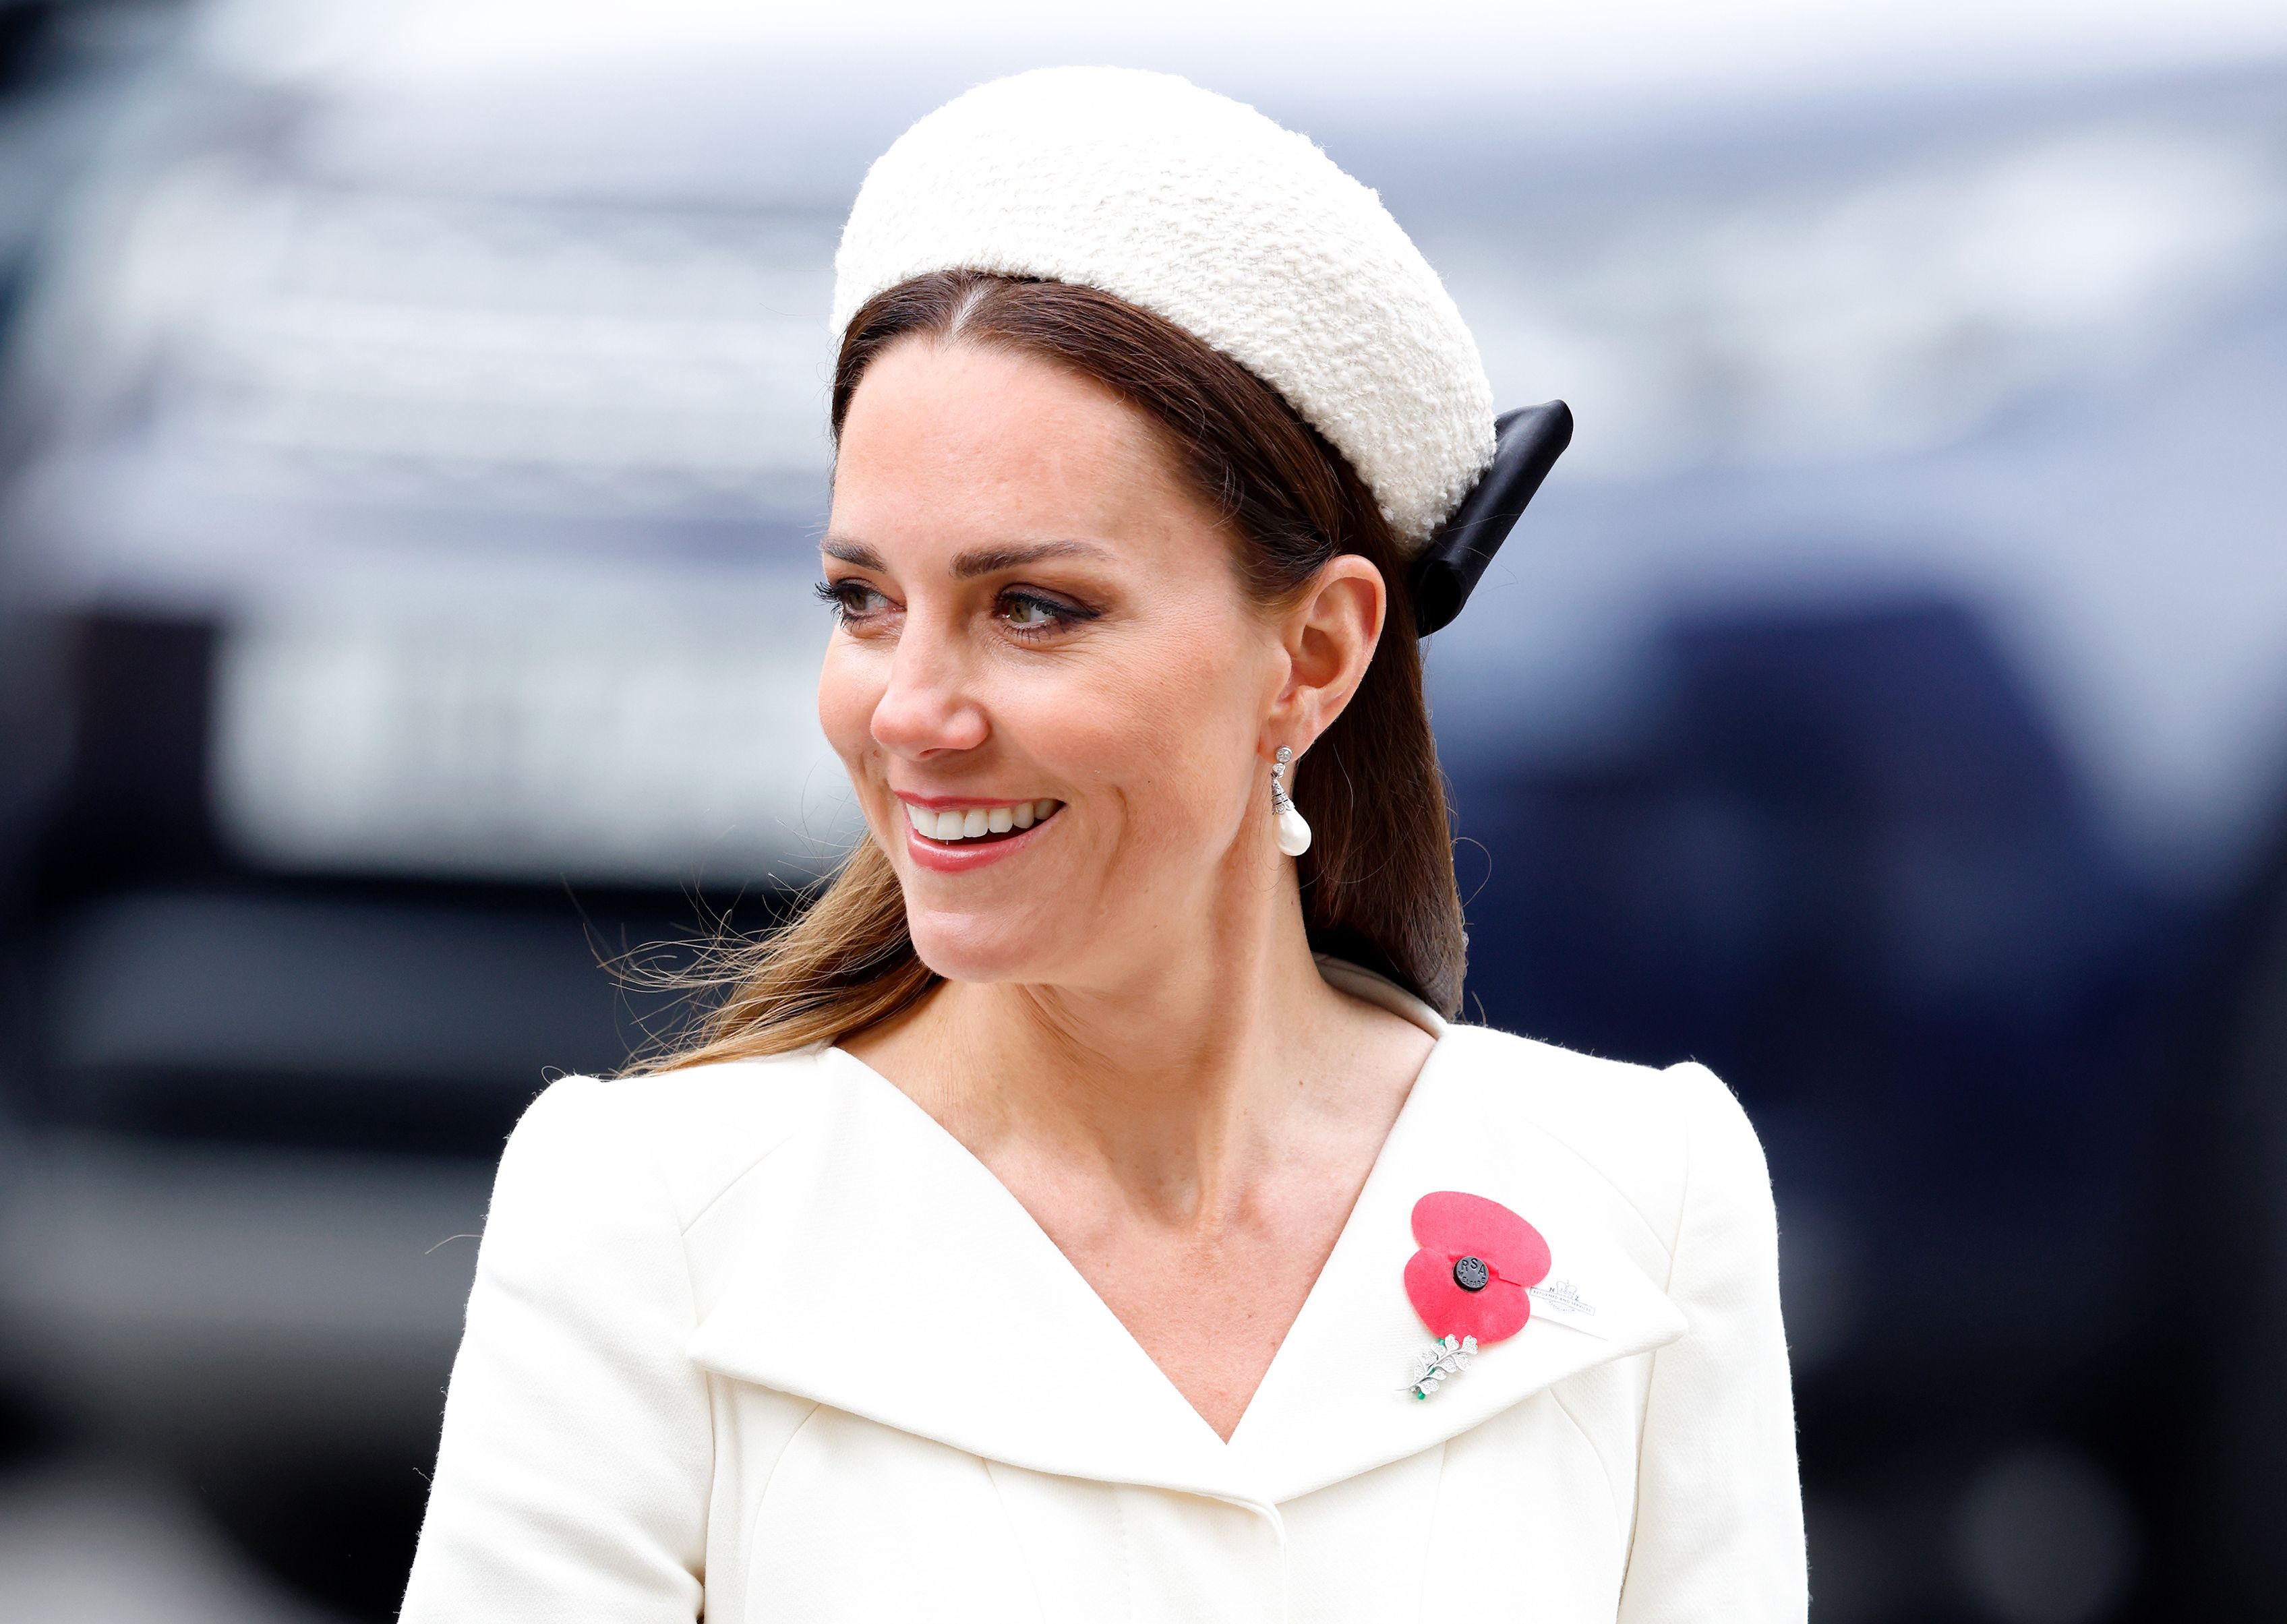 A of Kate Middleton's Royal Titles Through the Years